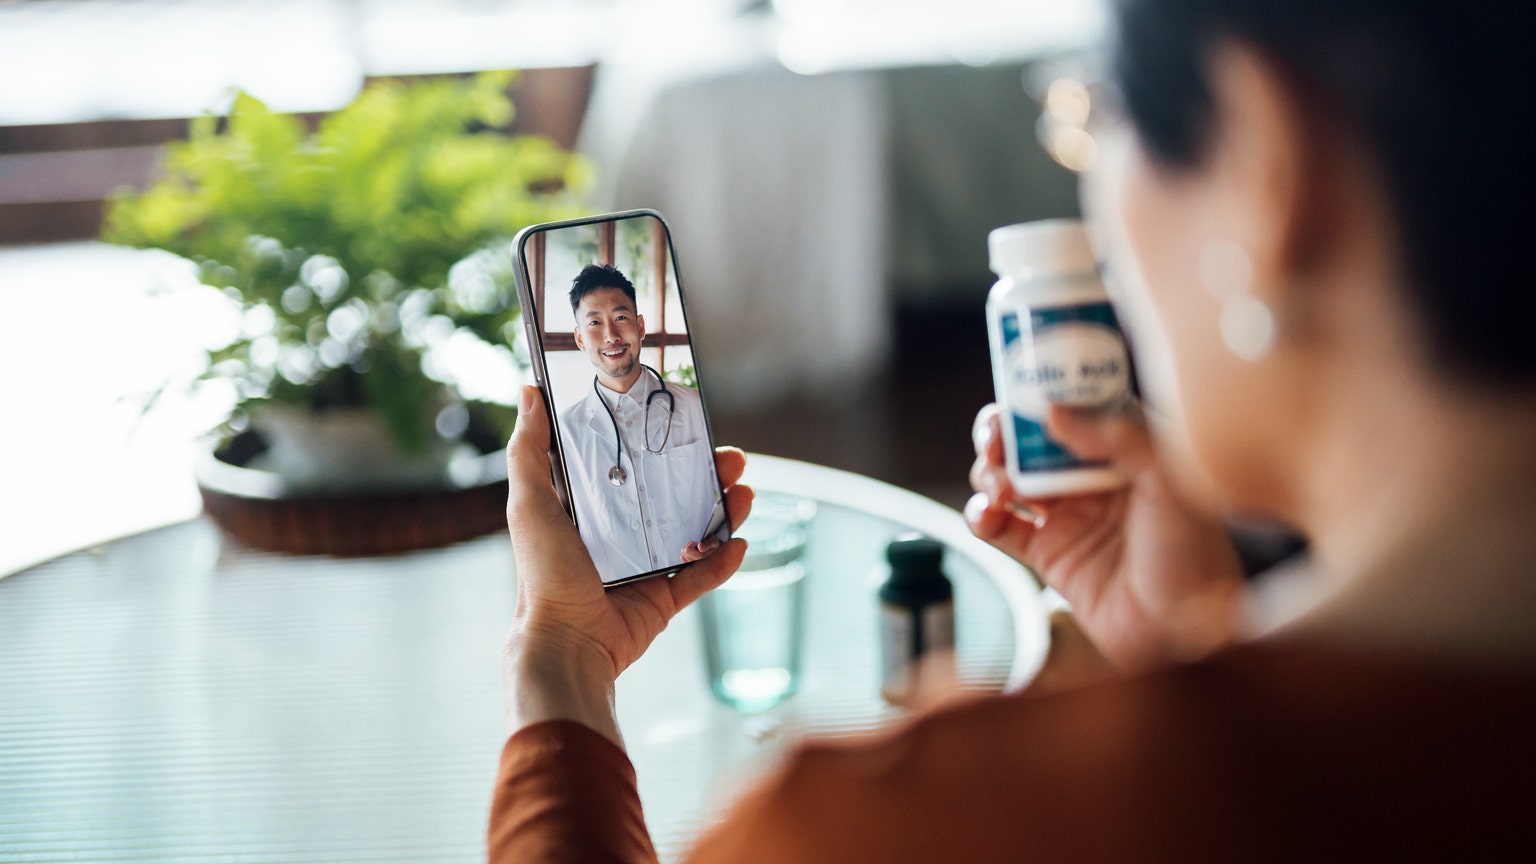 hims & hers - A Model For Better Care Through Patient Engagement and  Telemedicine